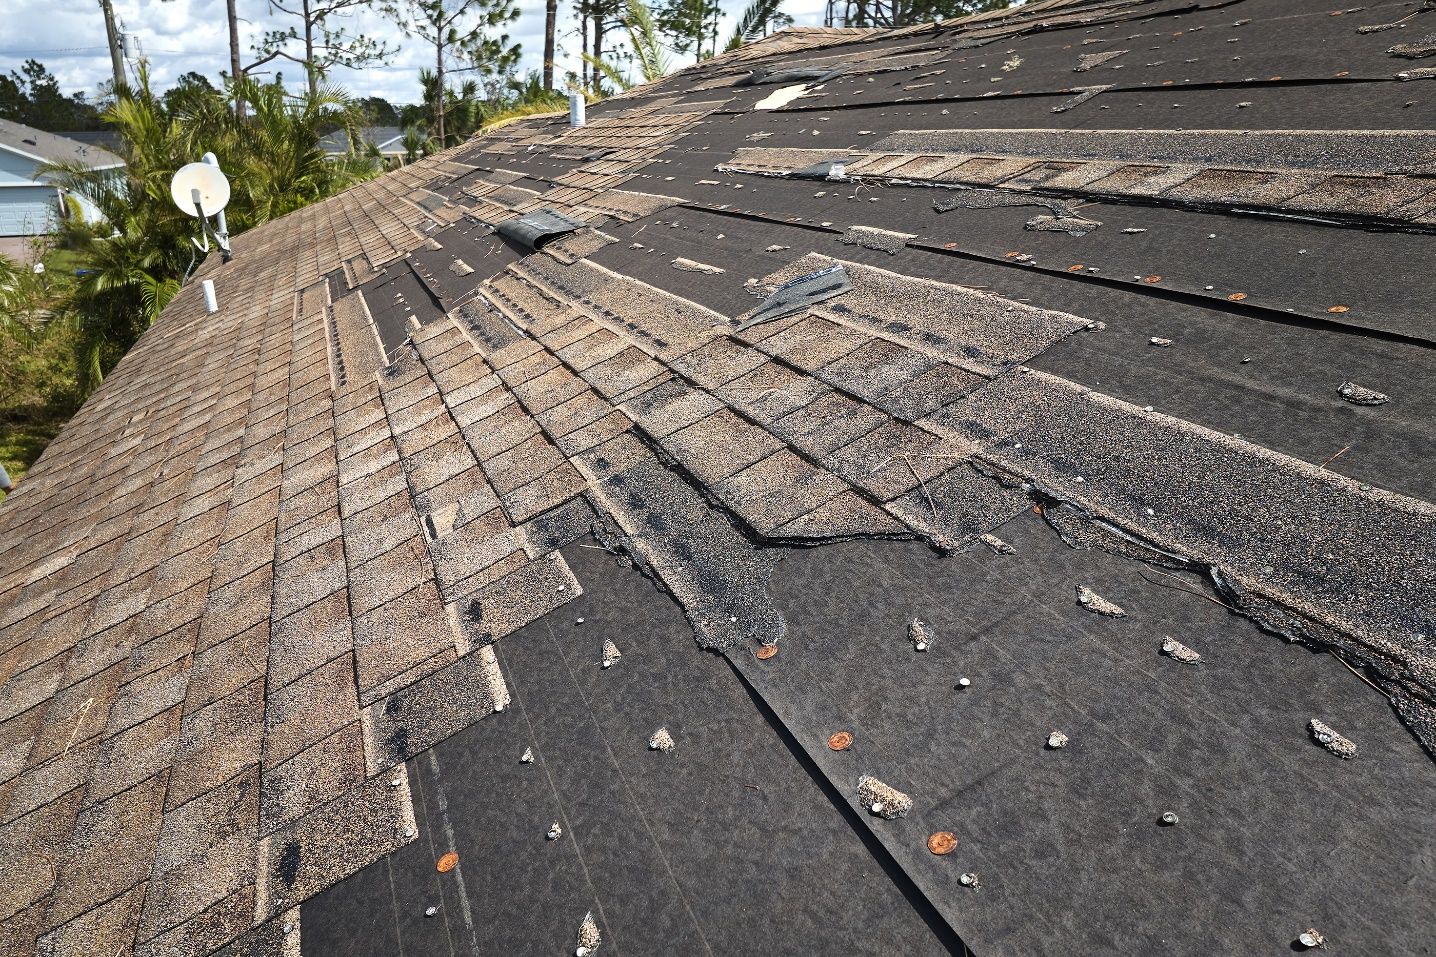 Brown roof shingles showing damage from storm